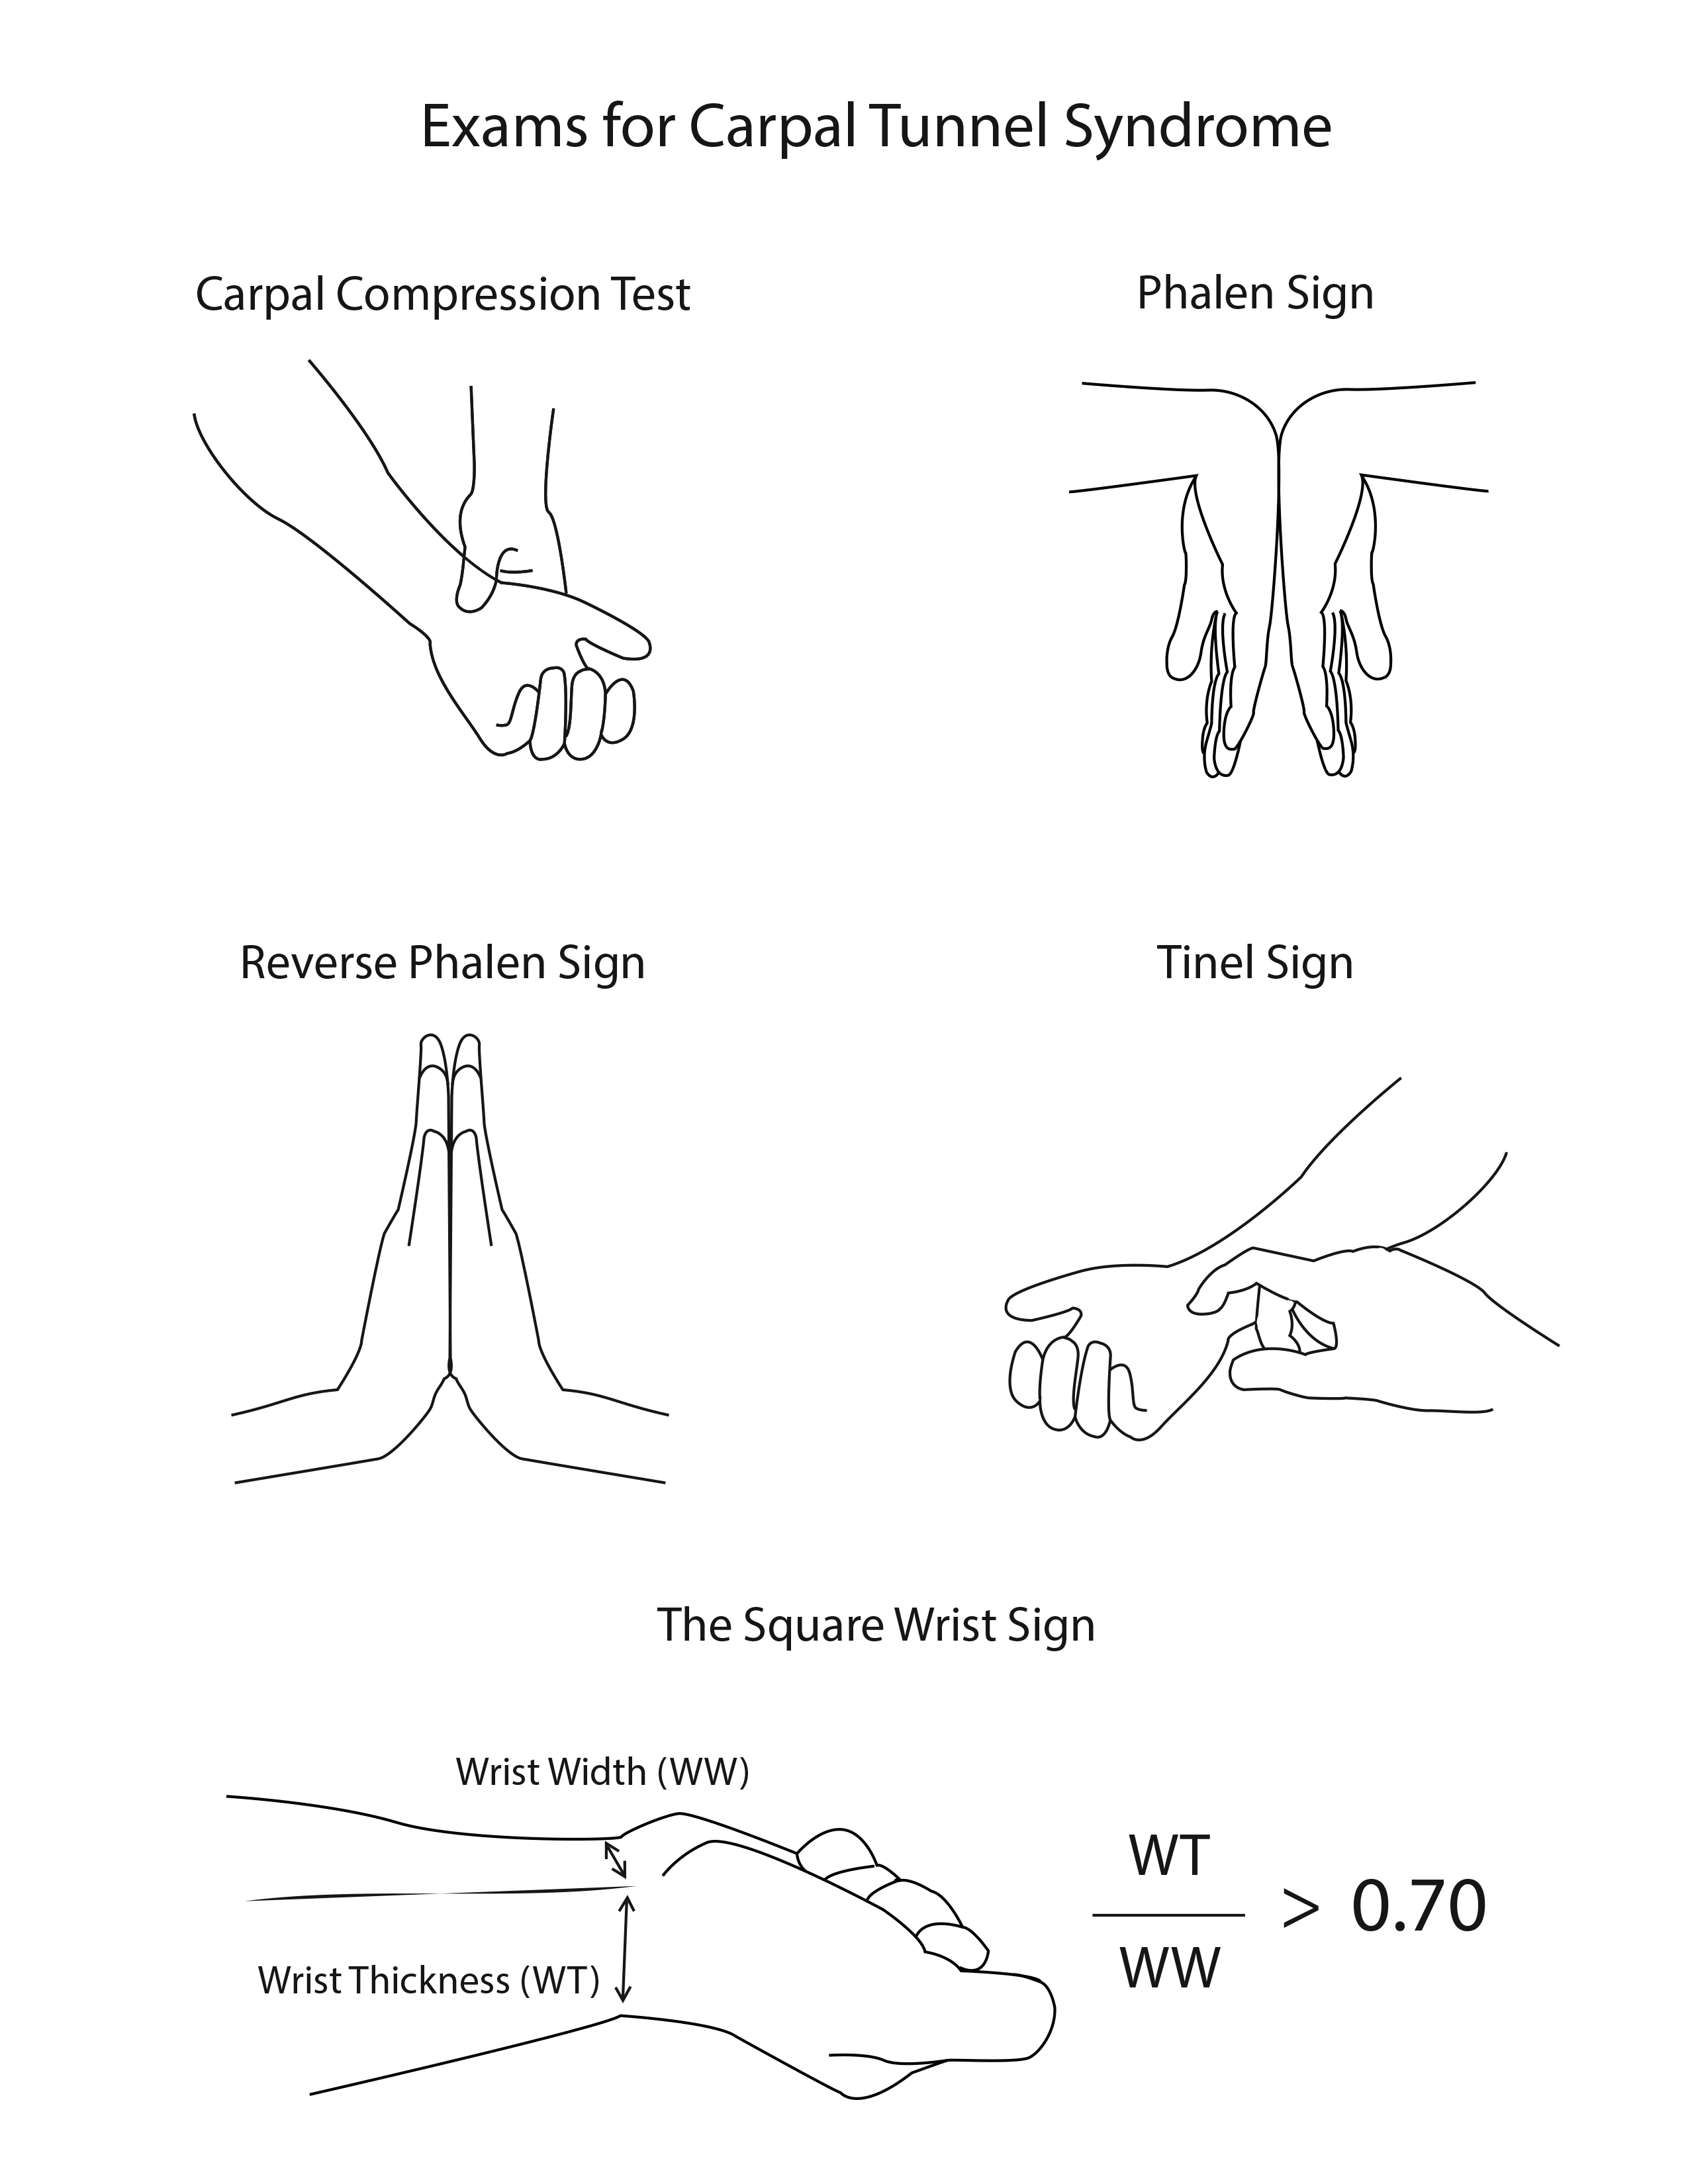 Physical exam maneuvers that test for carpal tunnel syndrome.